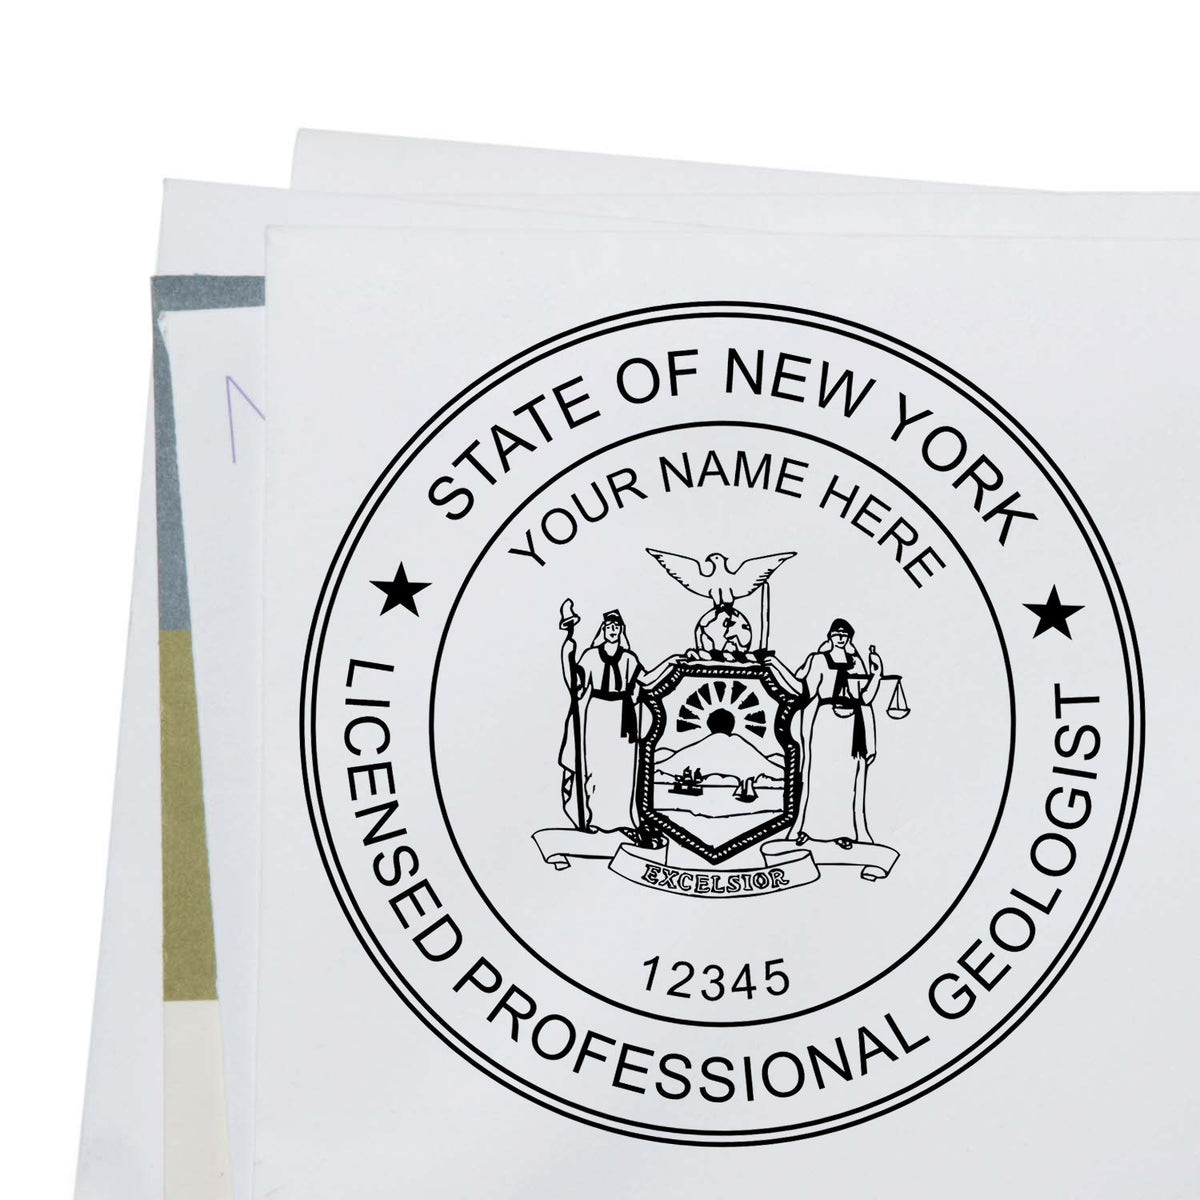 The New York Professional Geologist Seal Stamp stamp impression comes to life with a crisp, detailed image stamped on paper - showcasing true professional quality.